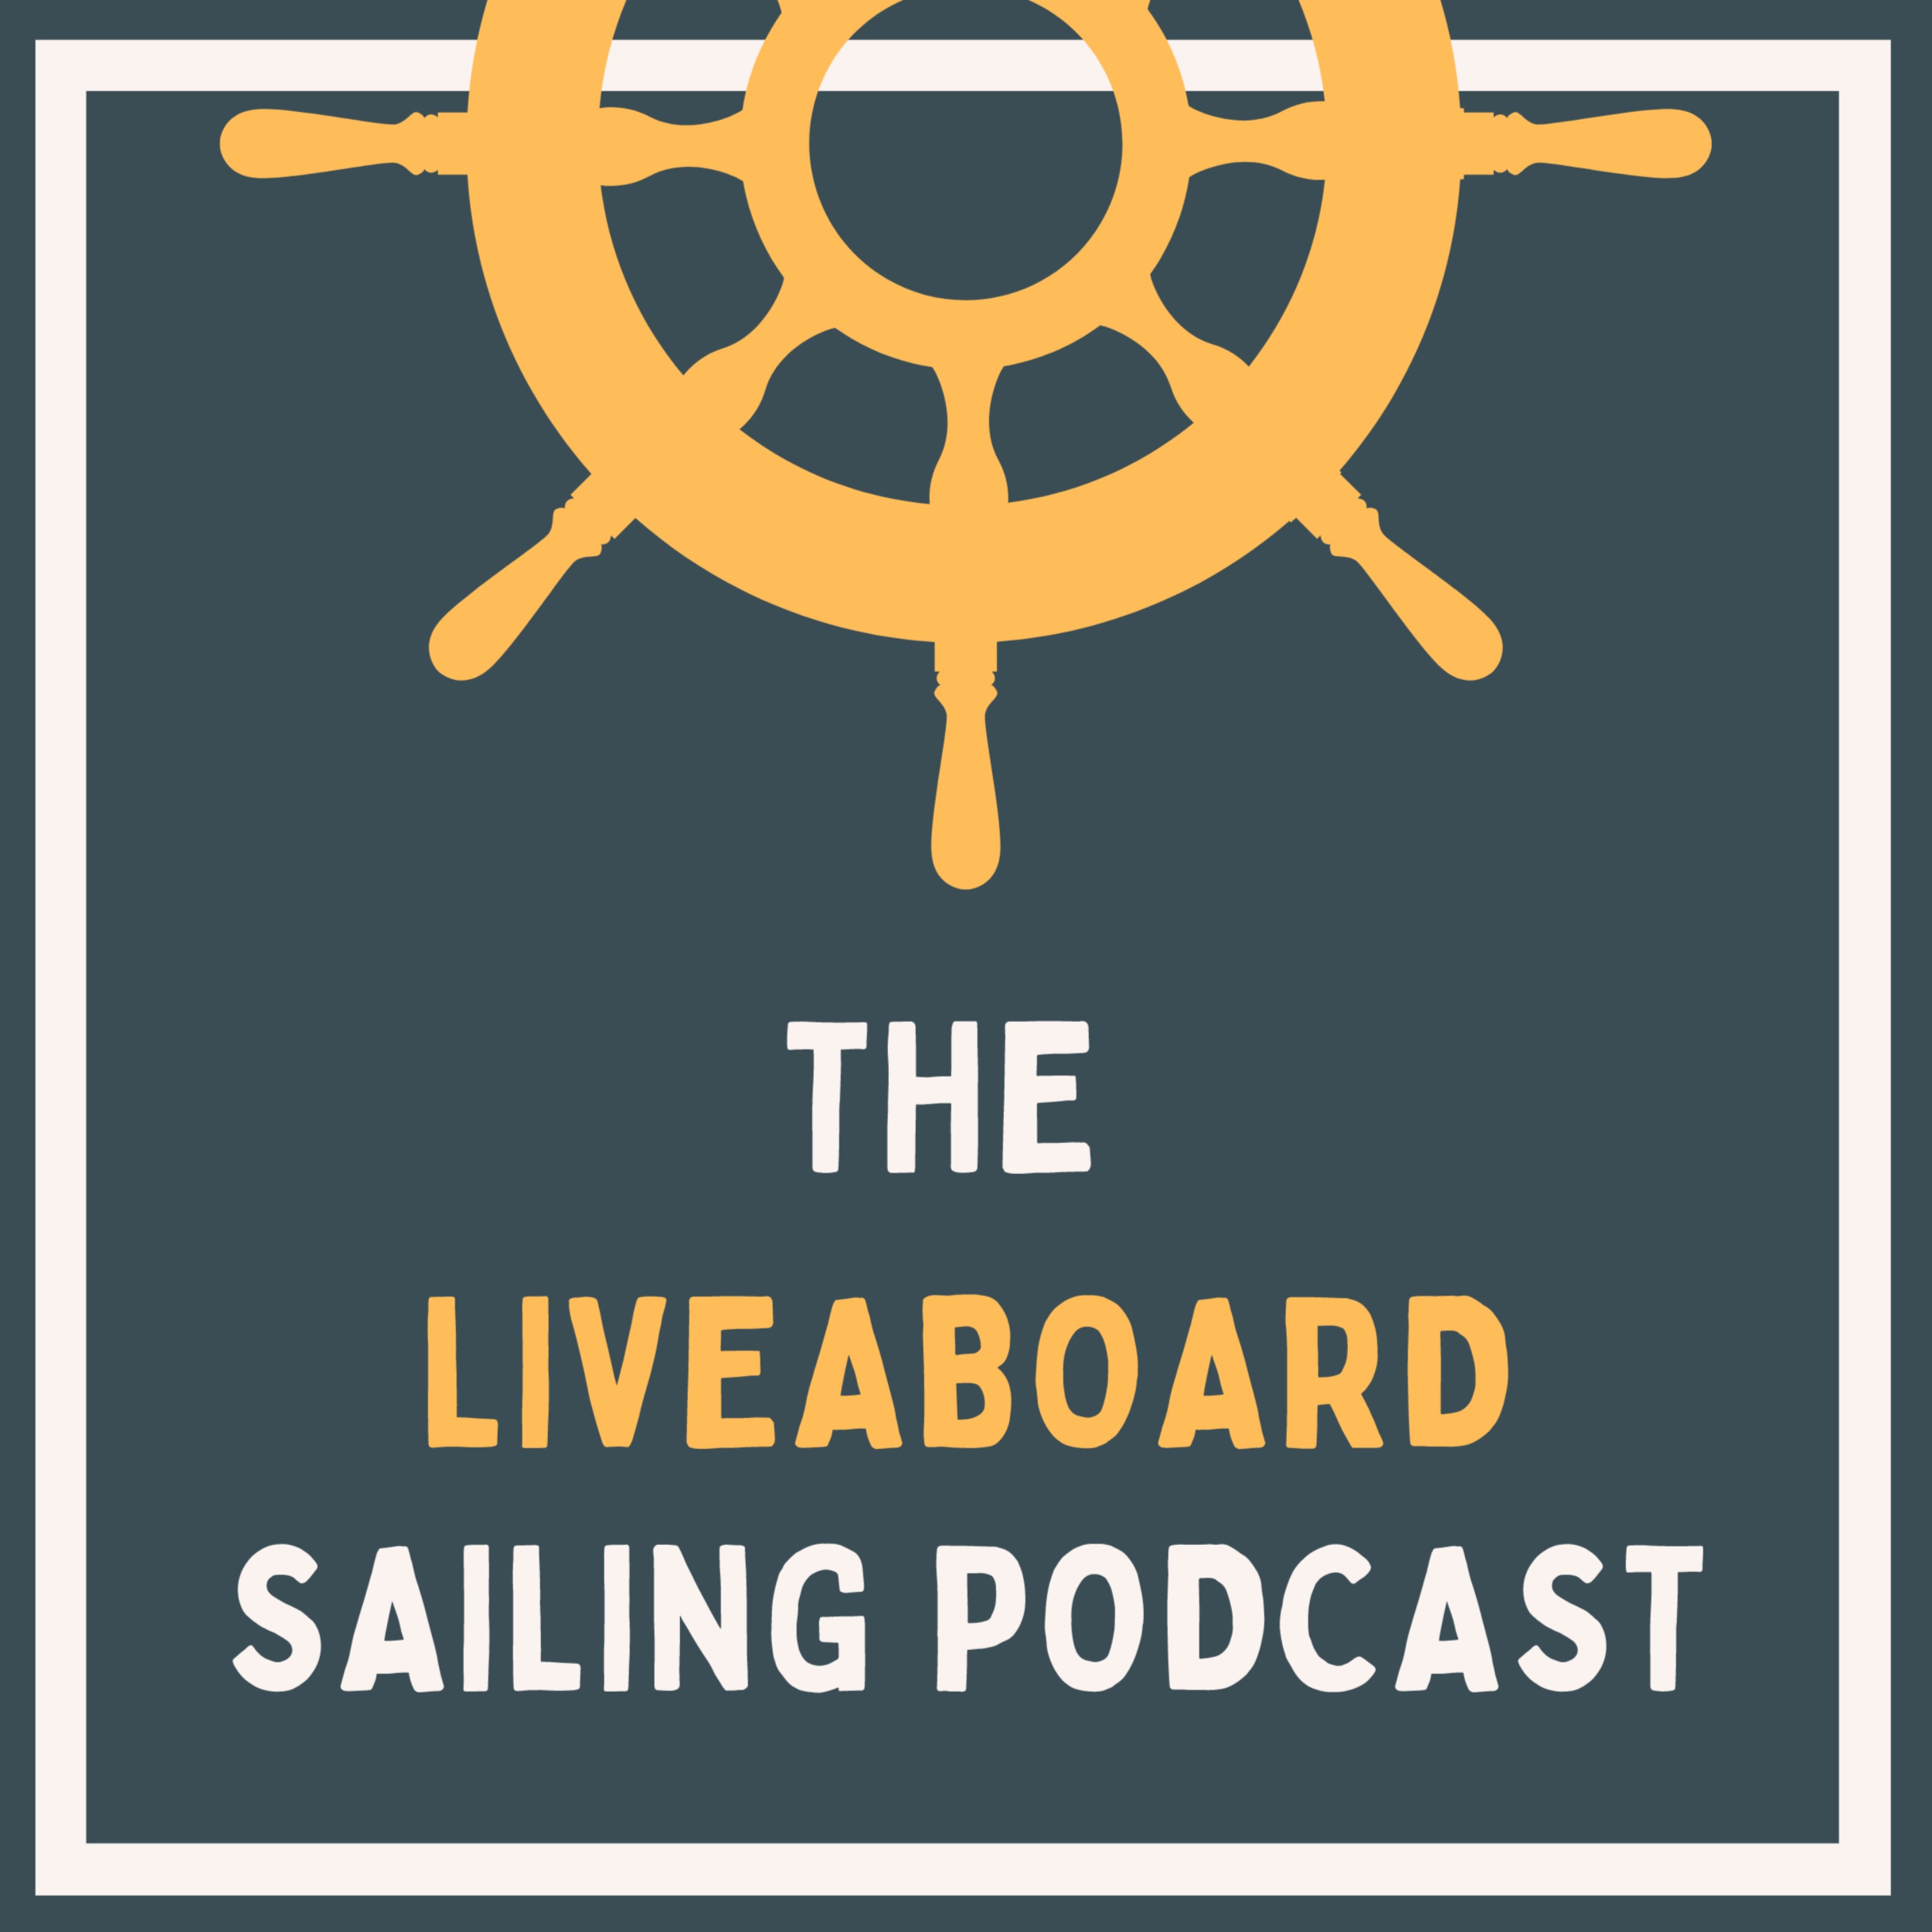 The reality of liveaboard sailing: Epic adventures and sleepless nights